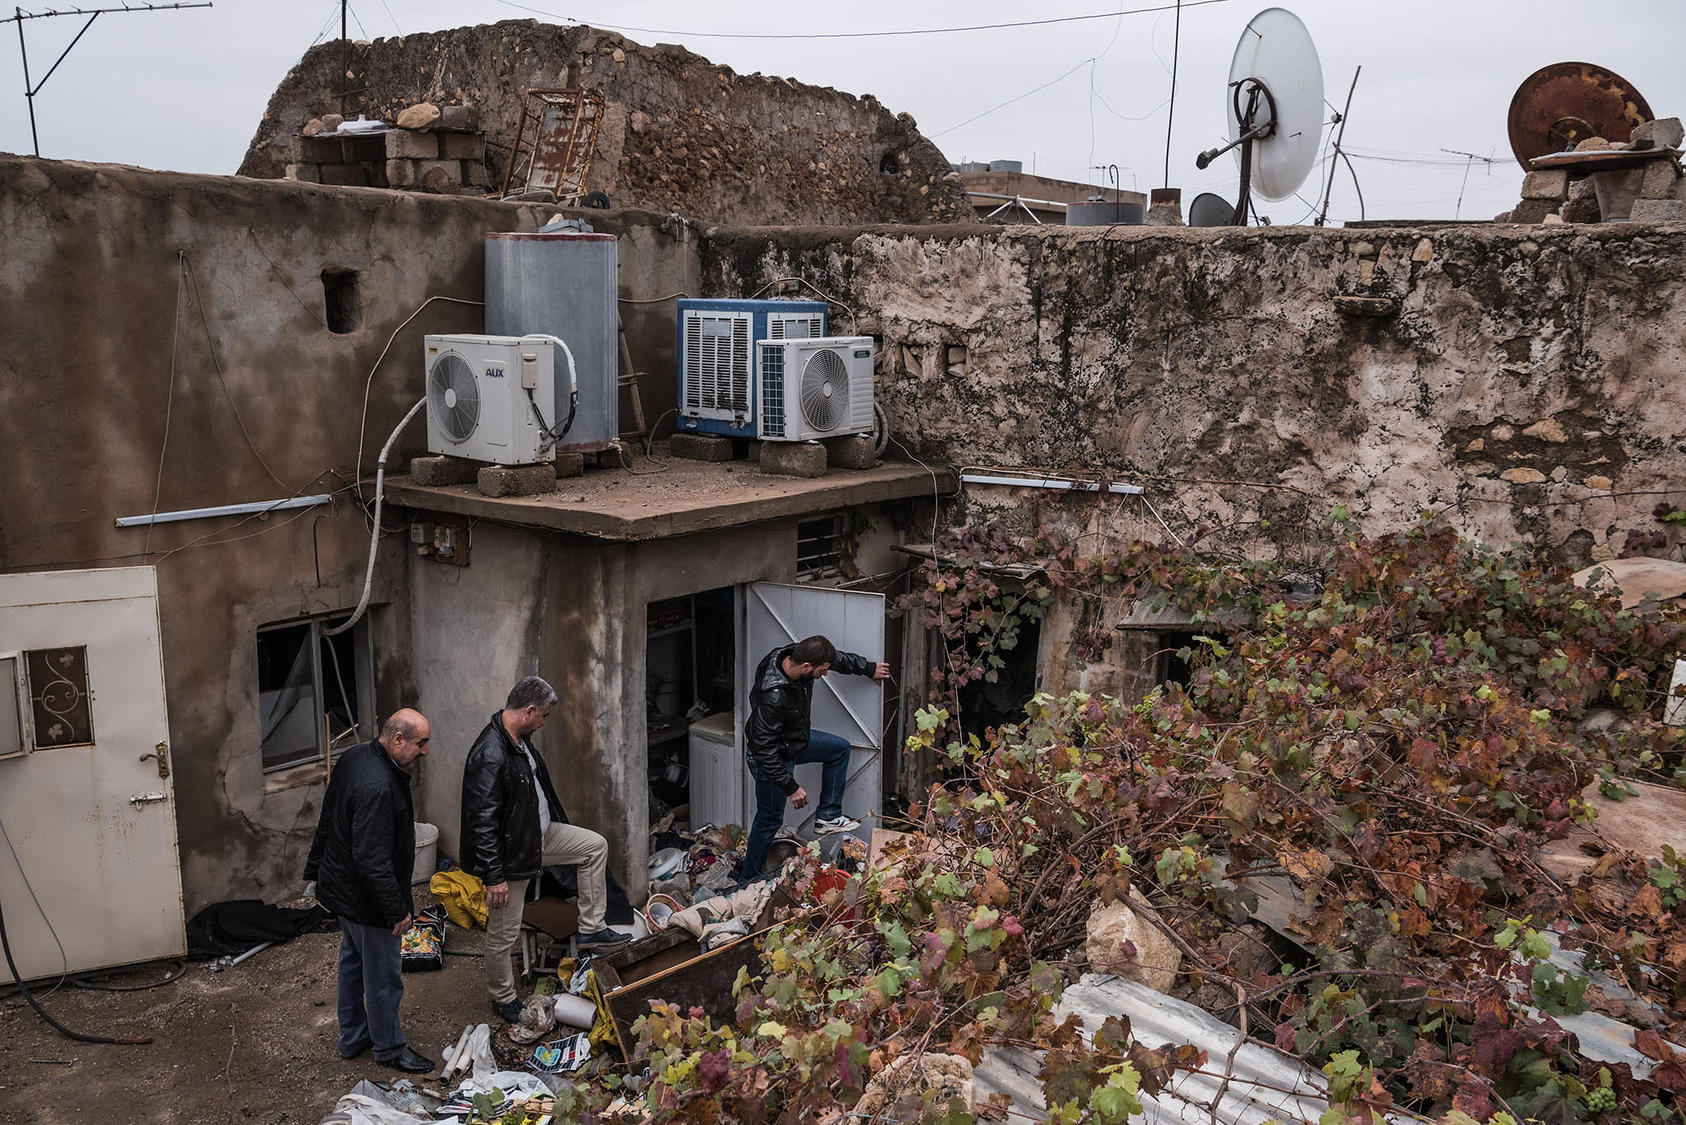 Men from the Al-Saka family check their house after they said they had not been there for two years during Islamic State occupation, in Bartella, a predominantly Christian town in Iraq, Dec. 1, 2016. (Sergey Ponomarev/The New York Times)